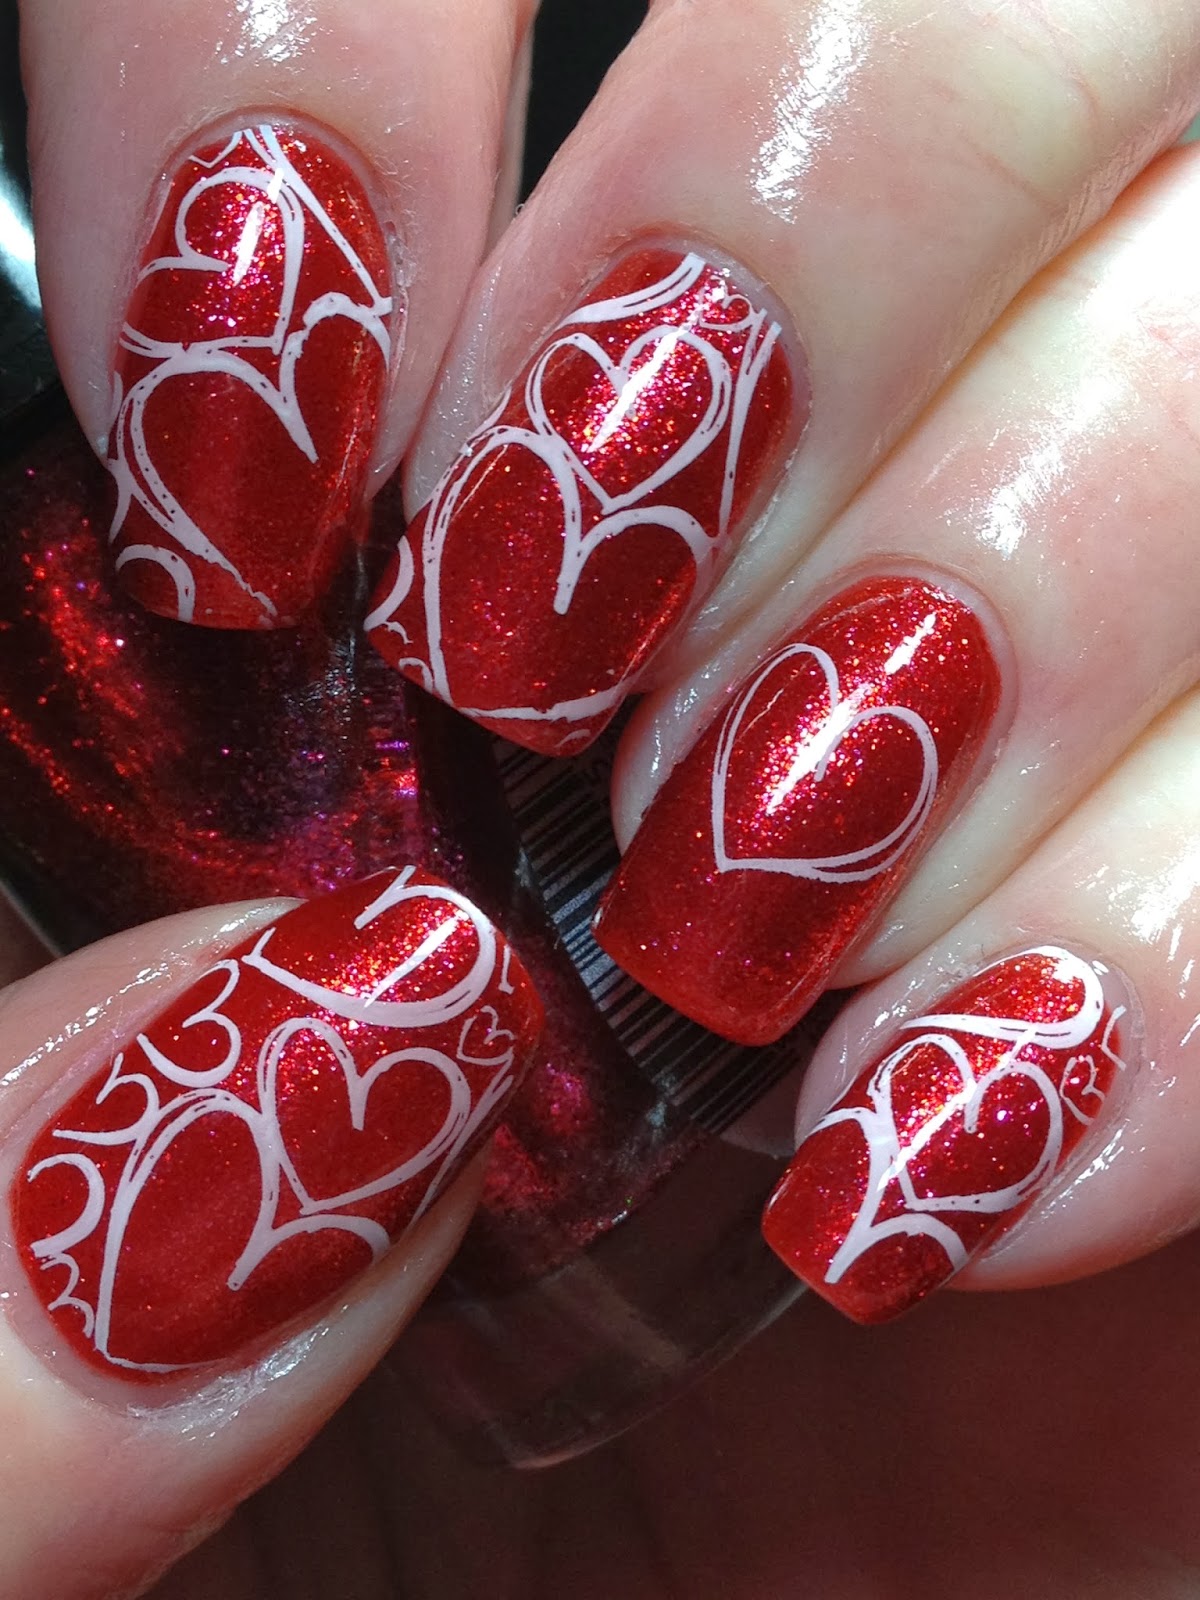 Canadian Nail Fanatic: Quick Hearts for Valentine's